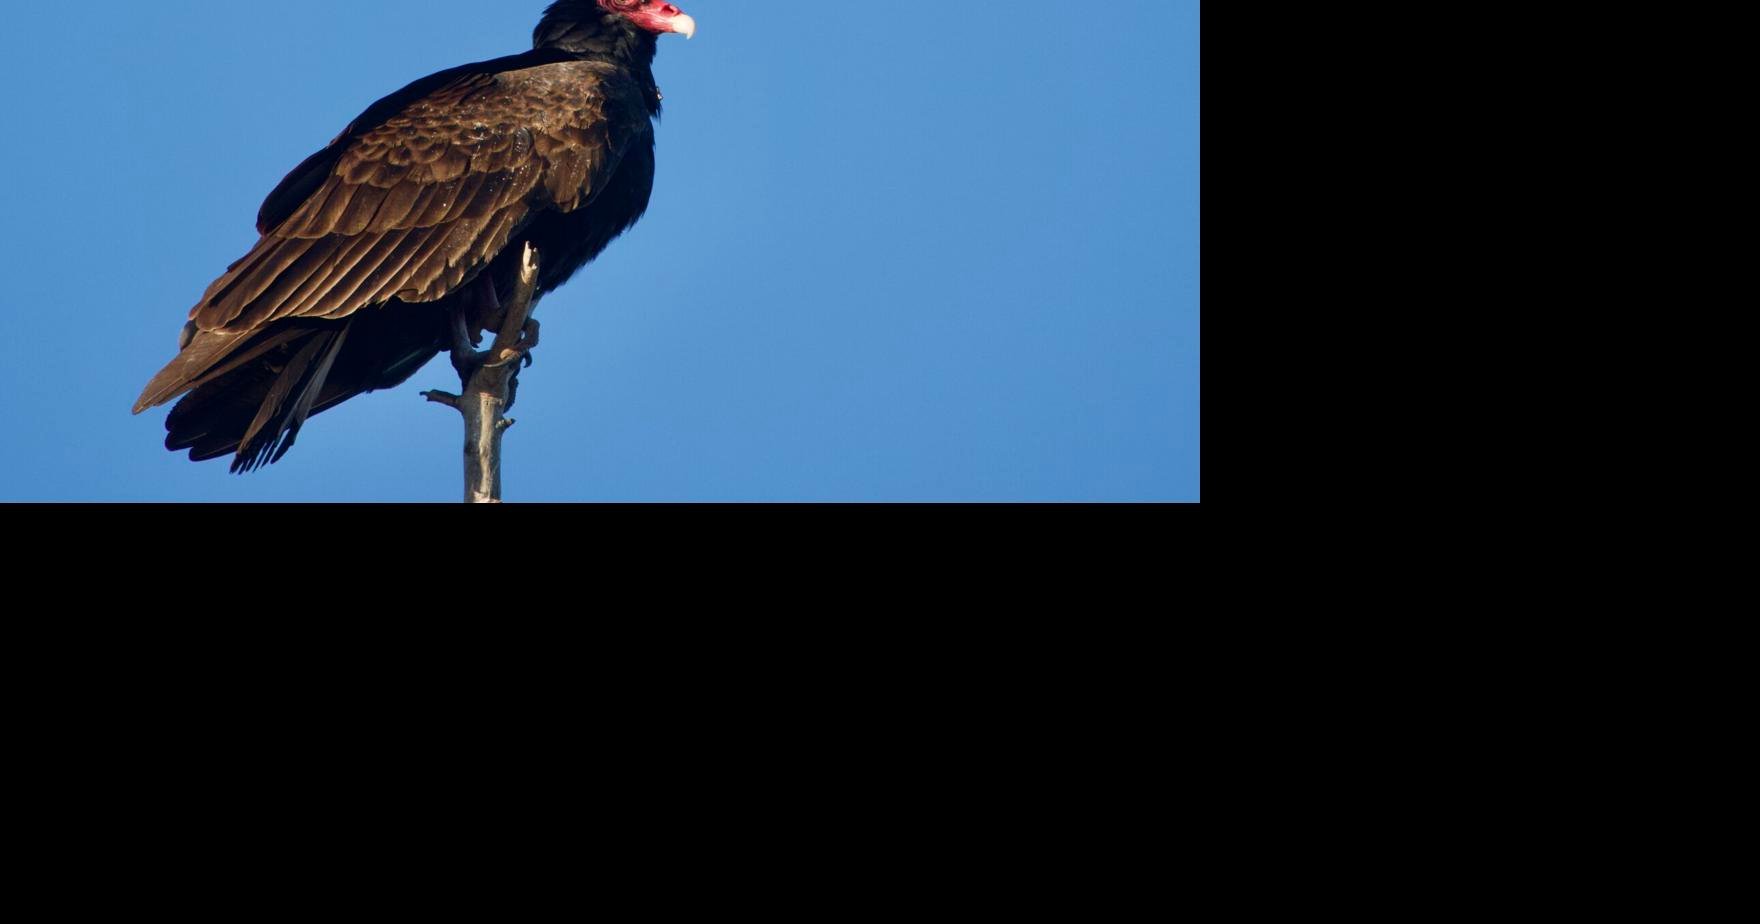 Why are Vultures so important to Humans and the Environment?